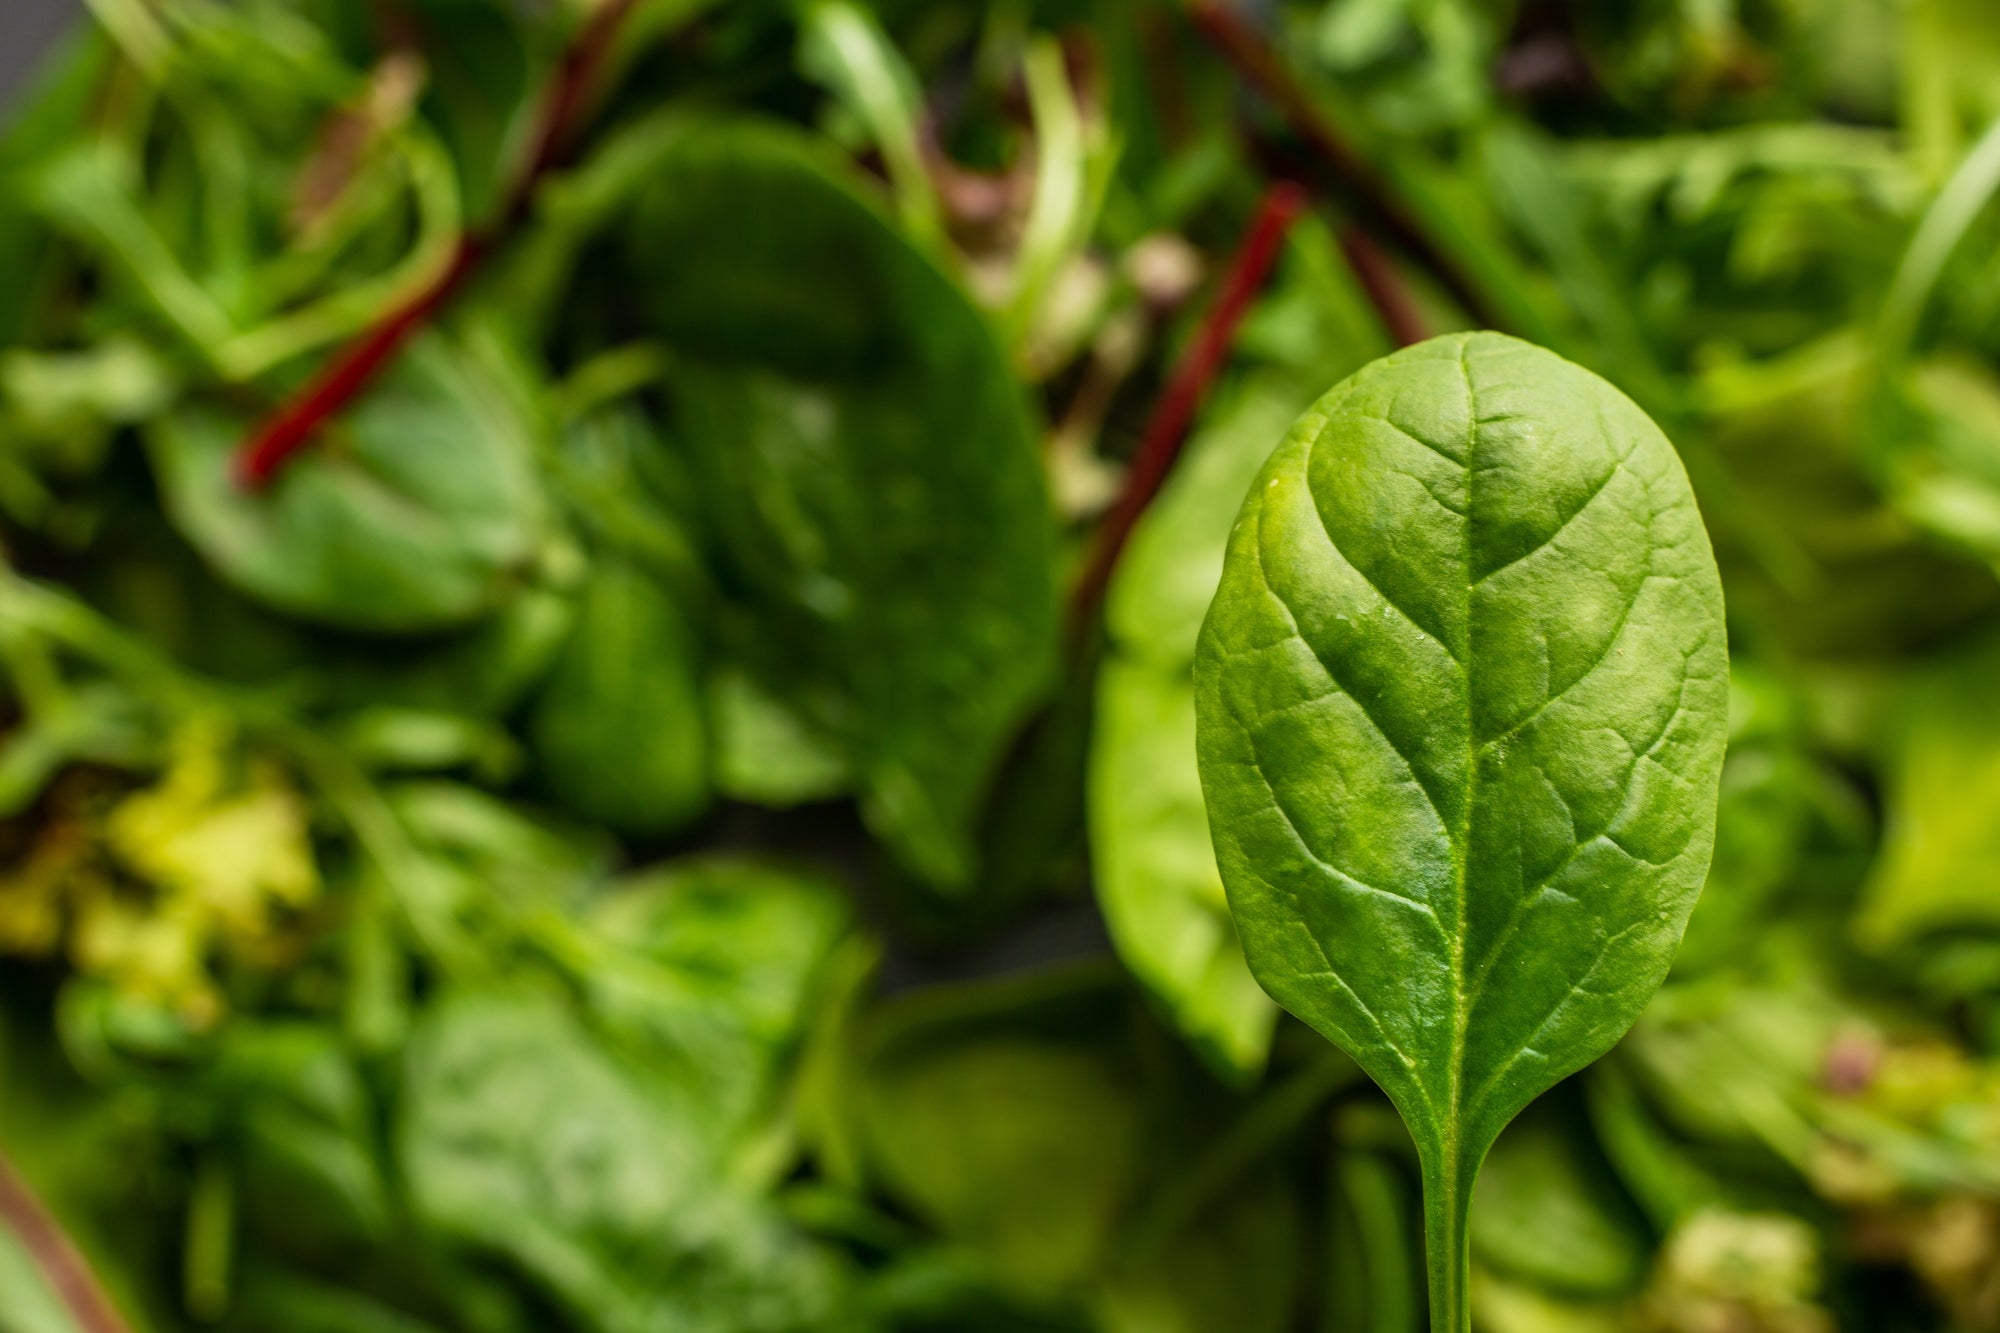 Different leaves of spinach, showing that different ingredients yield different results.